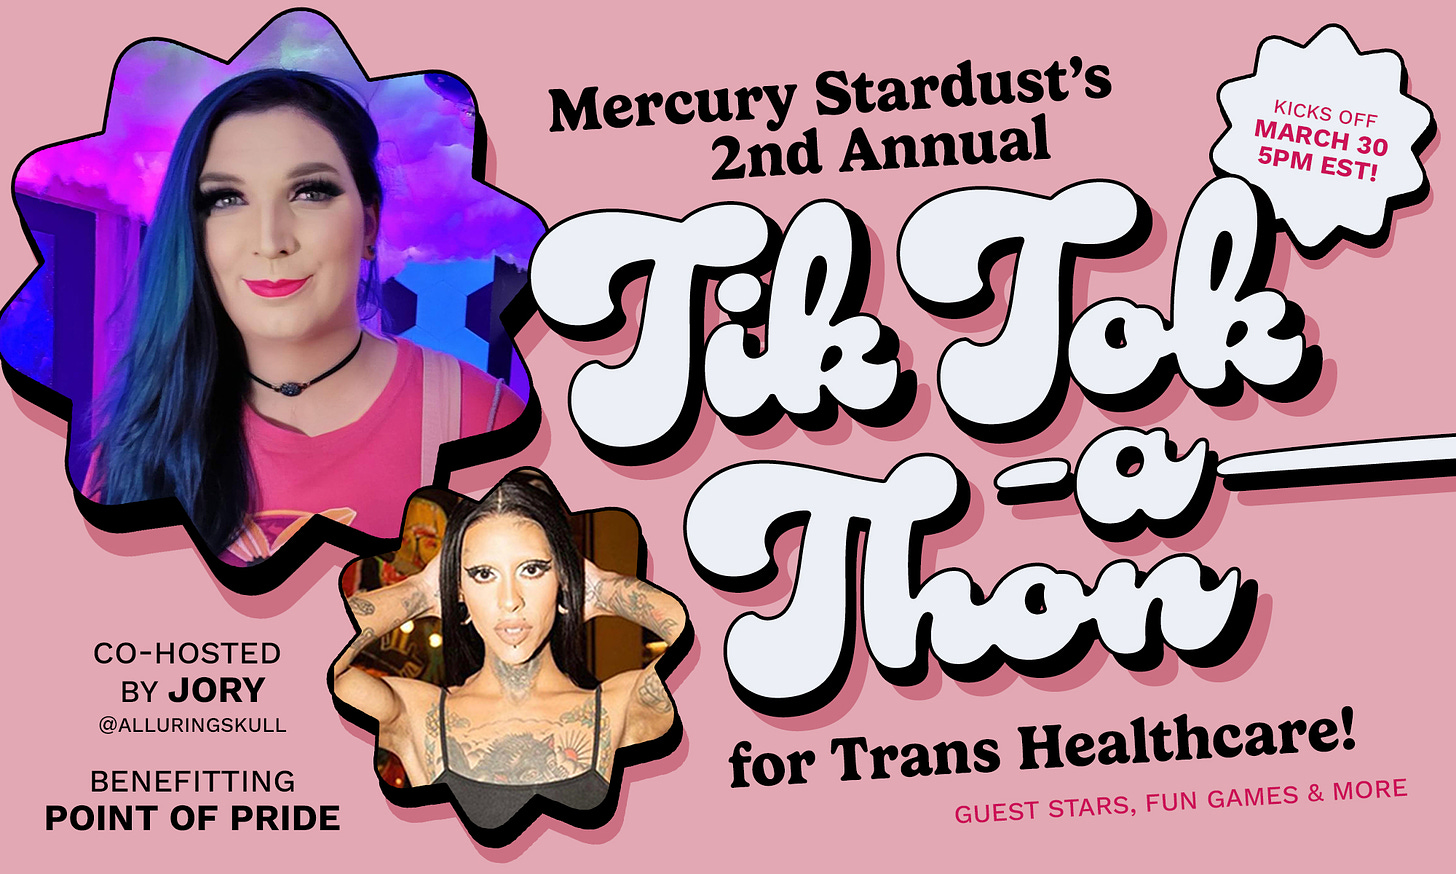 Graphic promoting Mercury Stardust's 2nd Annual Tik-Tok-a-Thon for Trans Healthcare